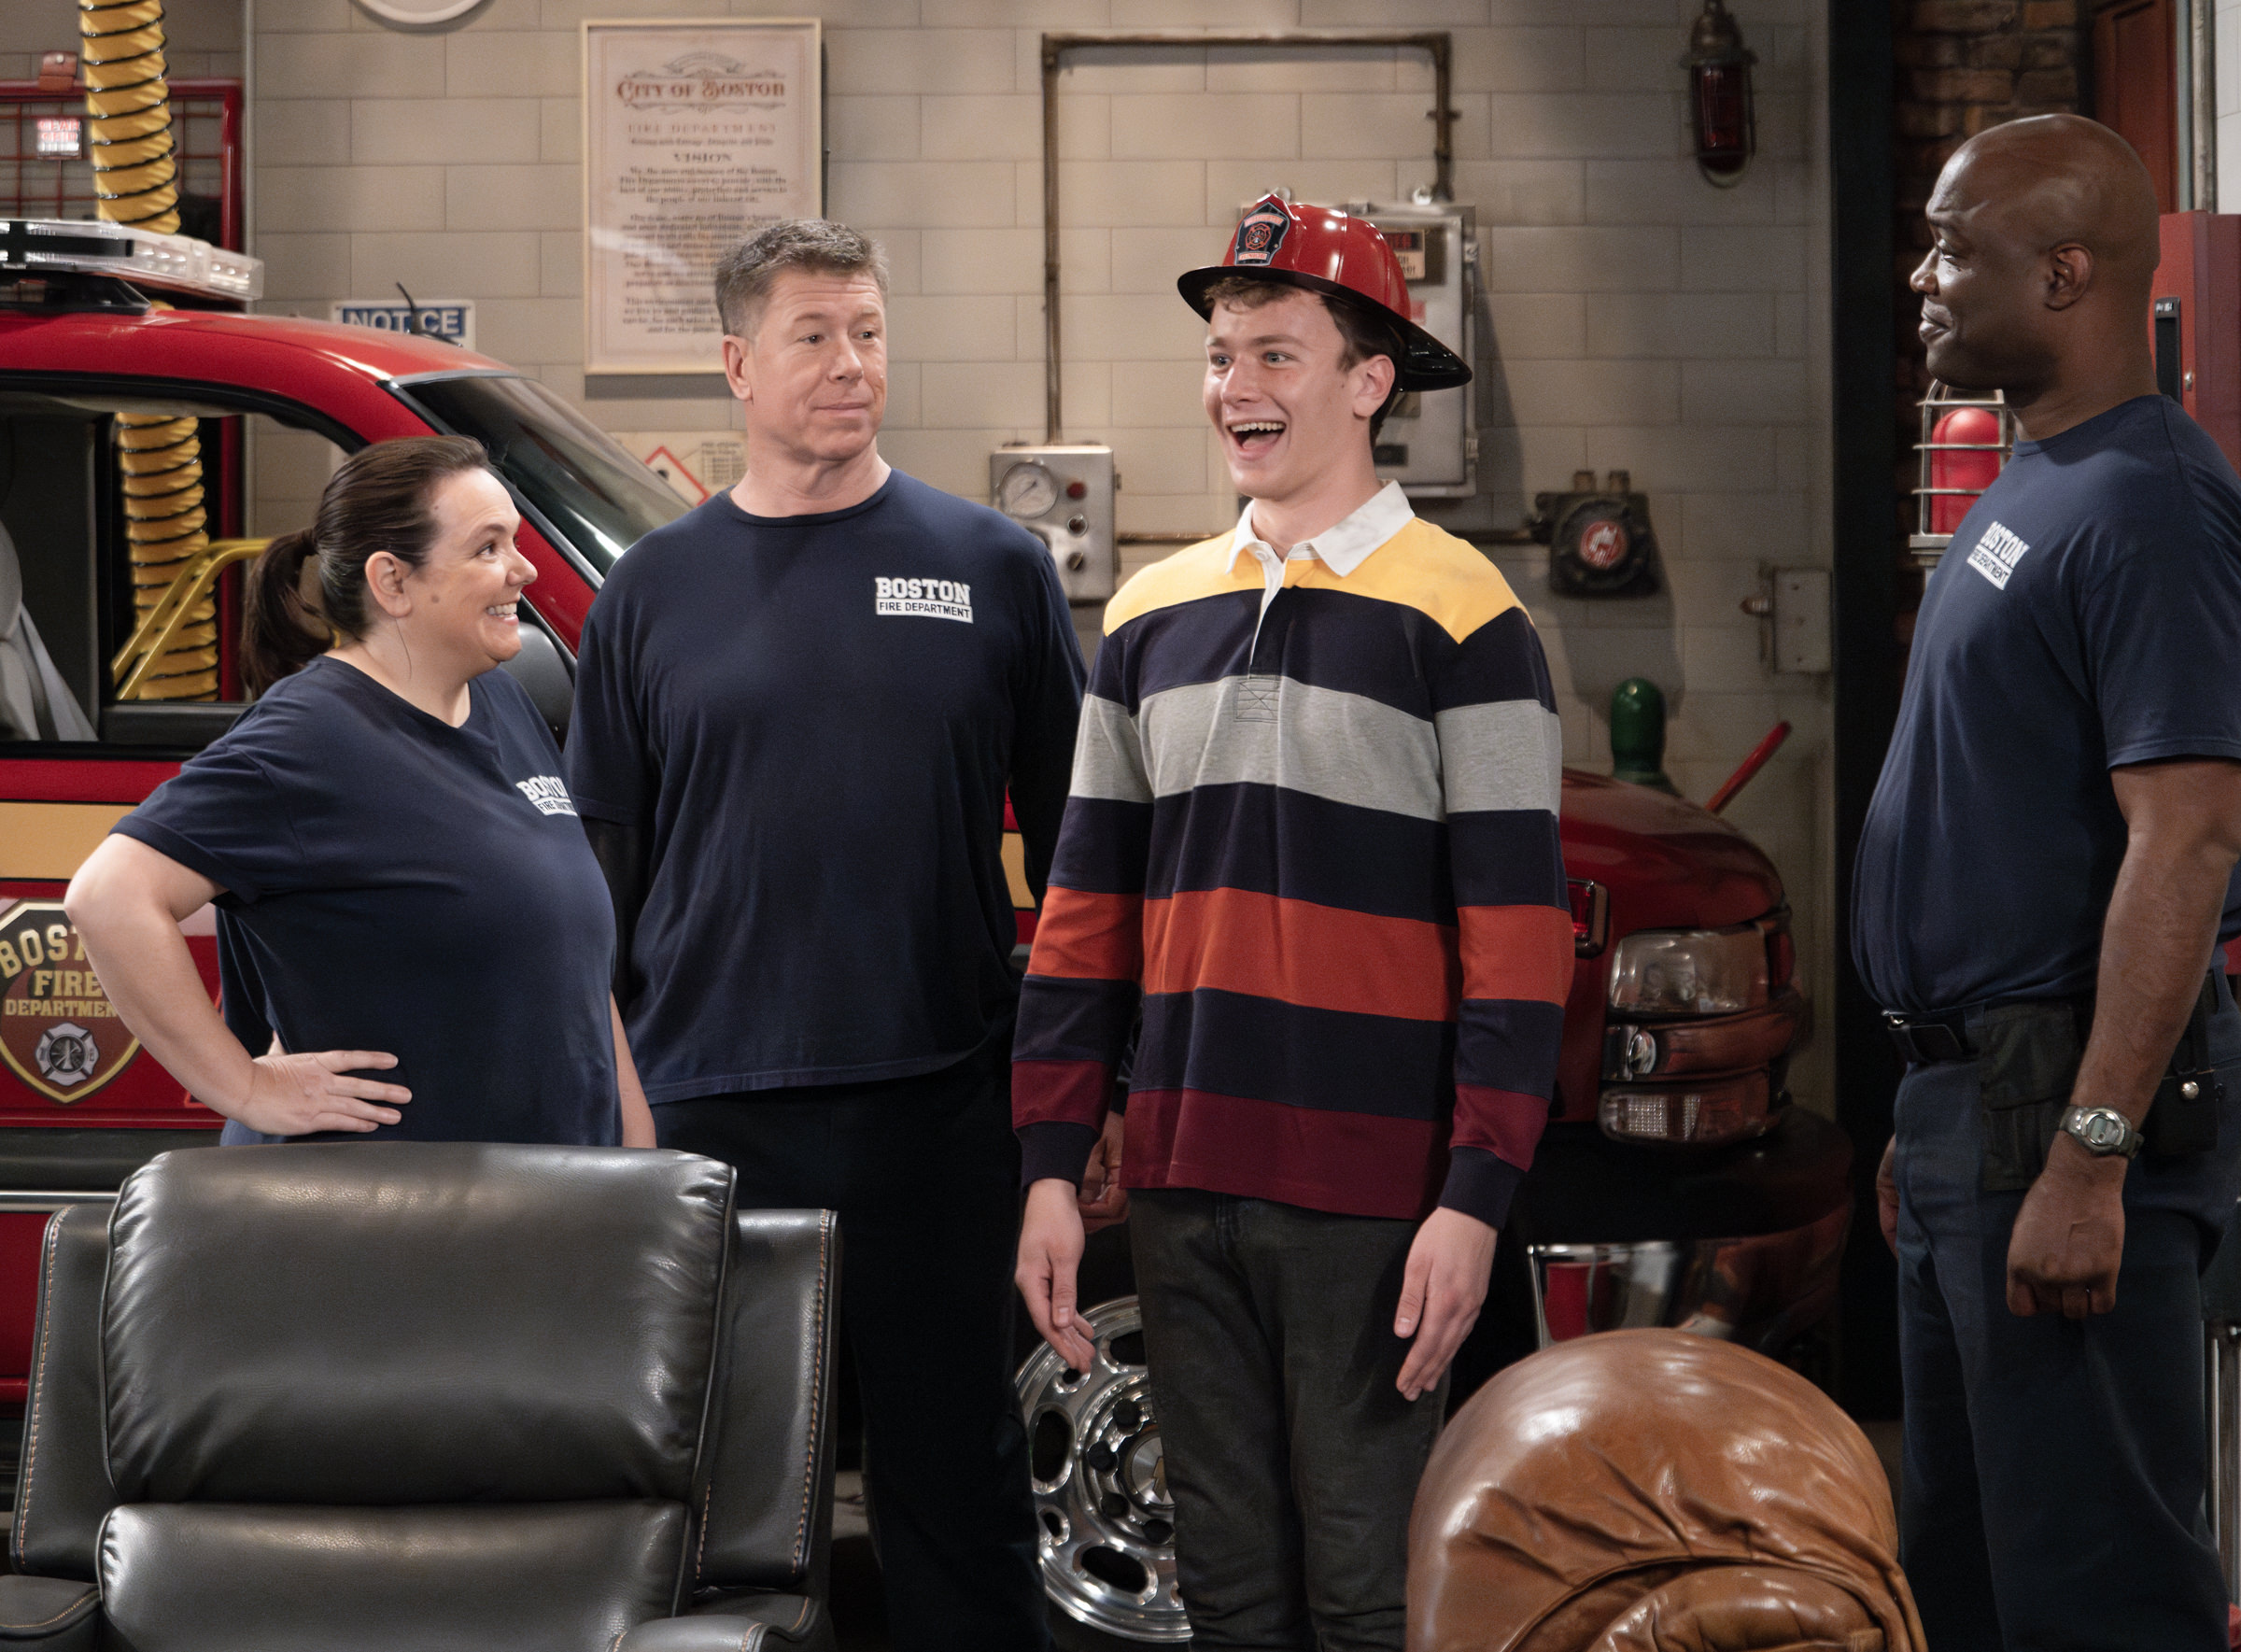 L-R: Renee Pezzotta as Smokey, Jimmy Dunn as Moose, Anders Keith as David and Kevin Daniels as Tiny in Frasier, episode 4, season 1 streaming on Paramount+, 2023.   Photo credit: Chris Haston/Paramount+